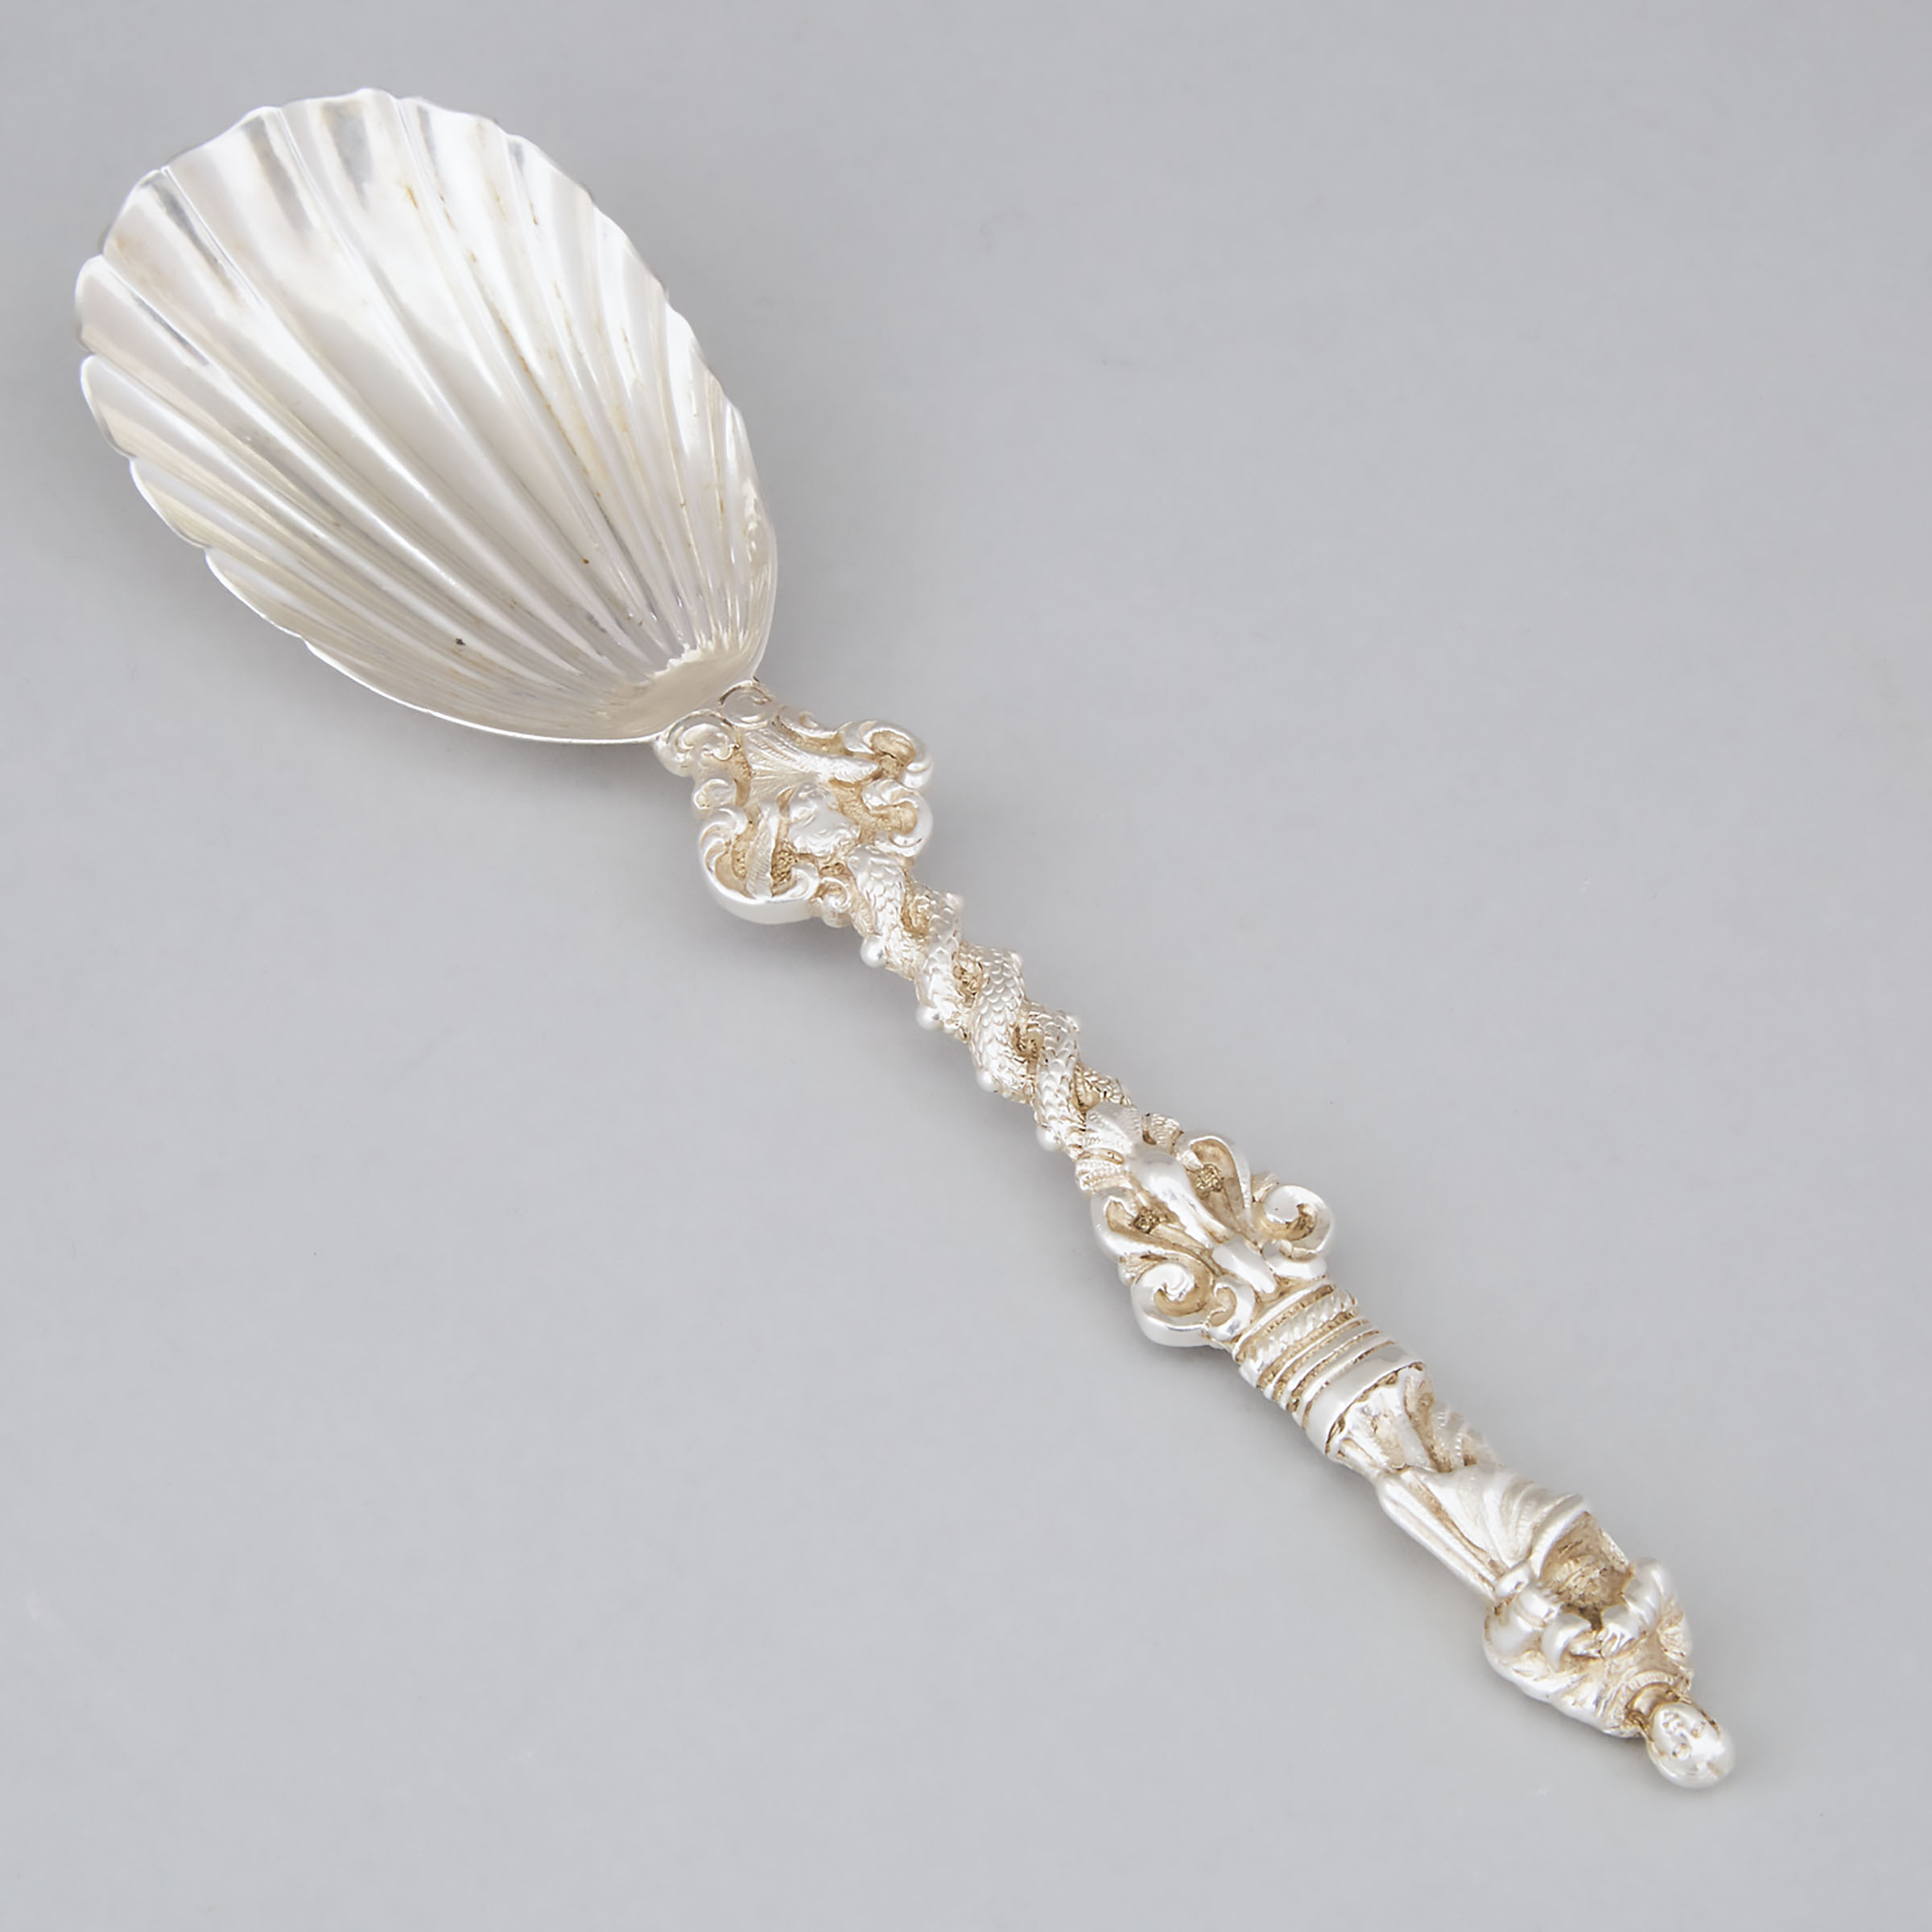 Victorian Silver Figural-Topped Berry Spoon, Charles Boyton II, London, 1885